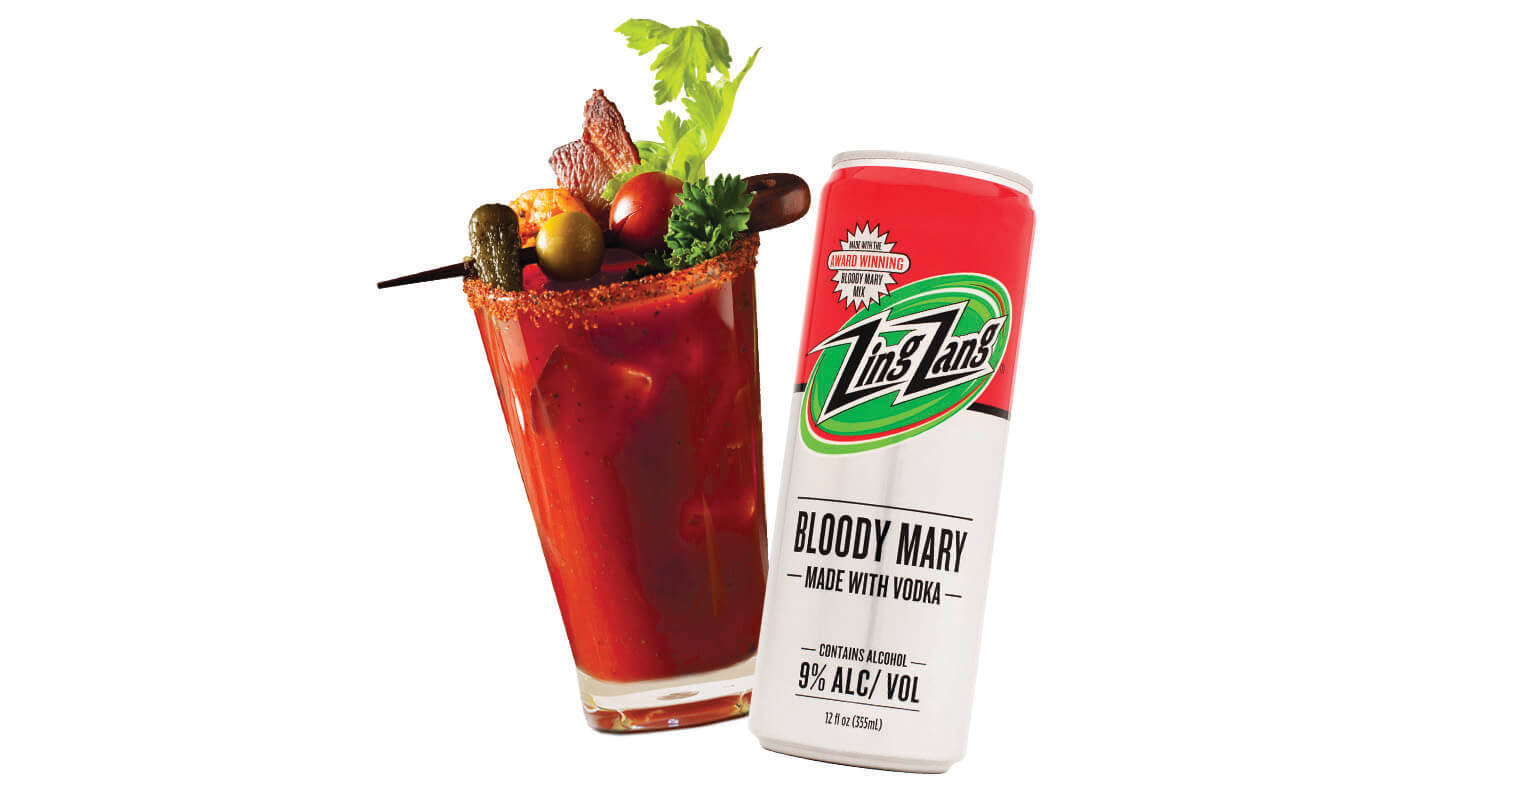 Zing Zang RTD Bloody Mary featured image